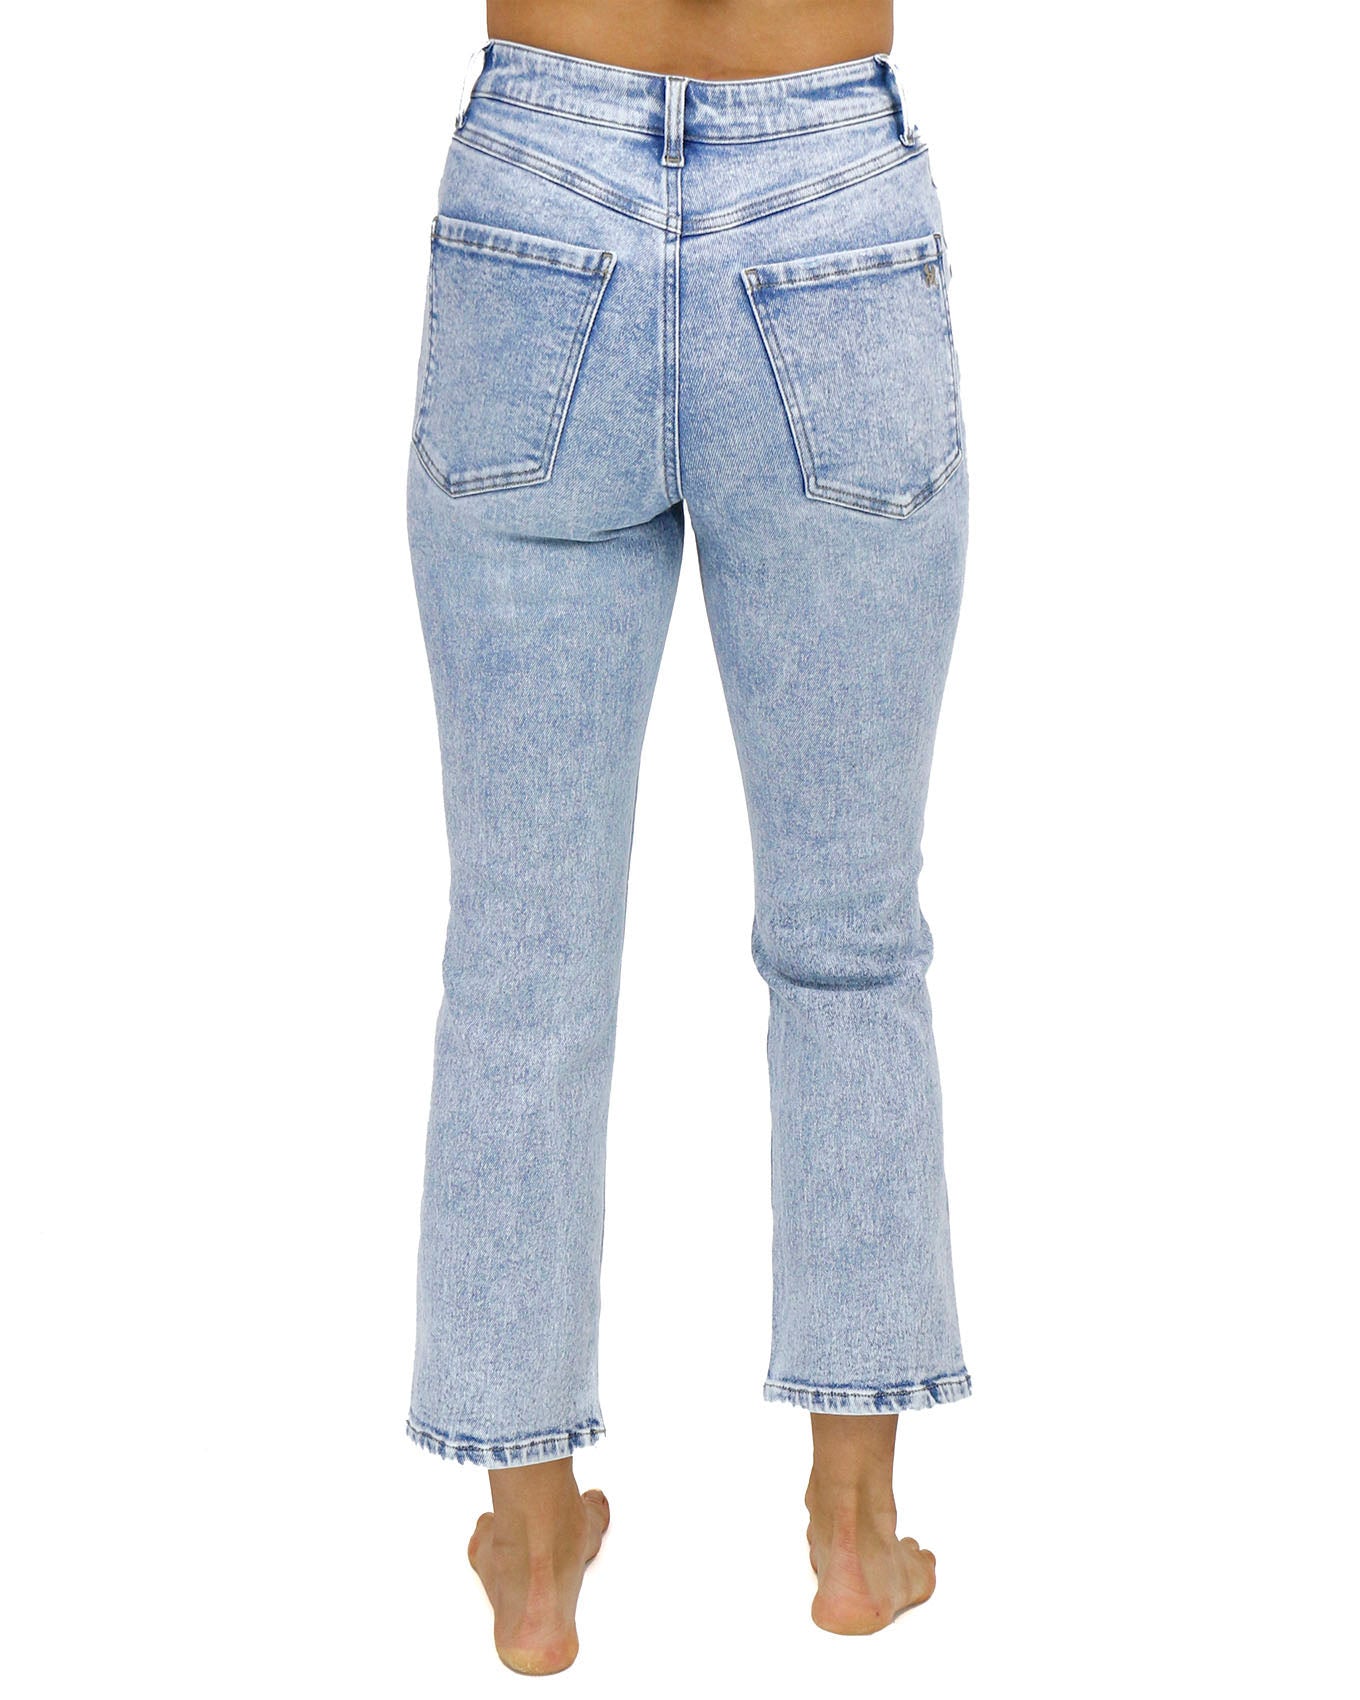 back view stock shot of premium high waisted mom jeans in distressed light mid-wash